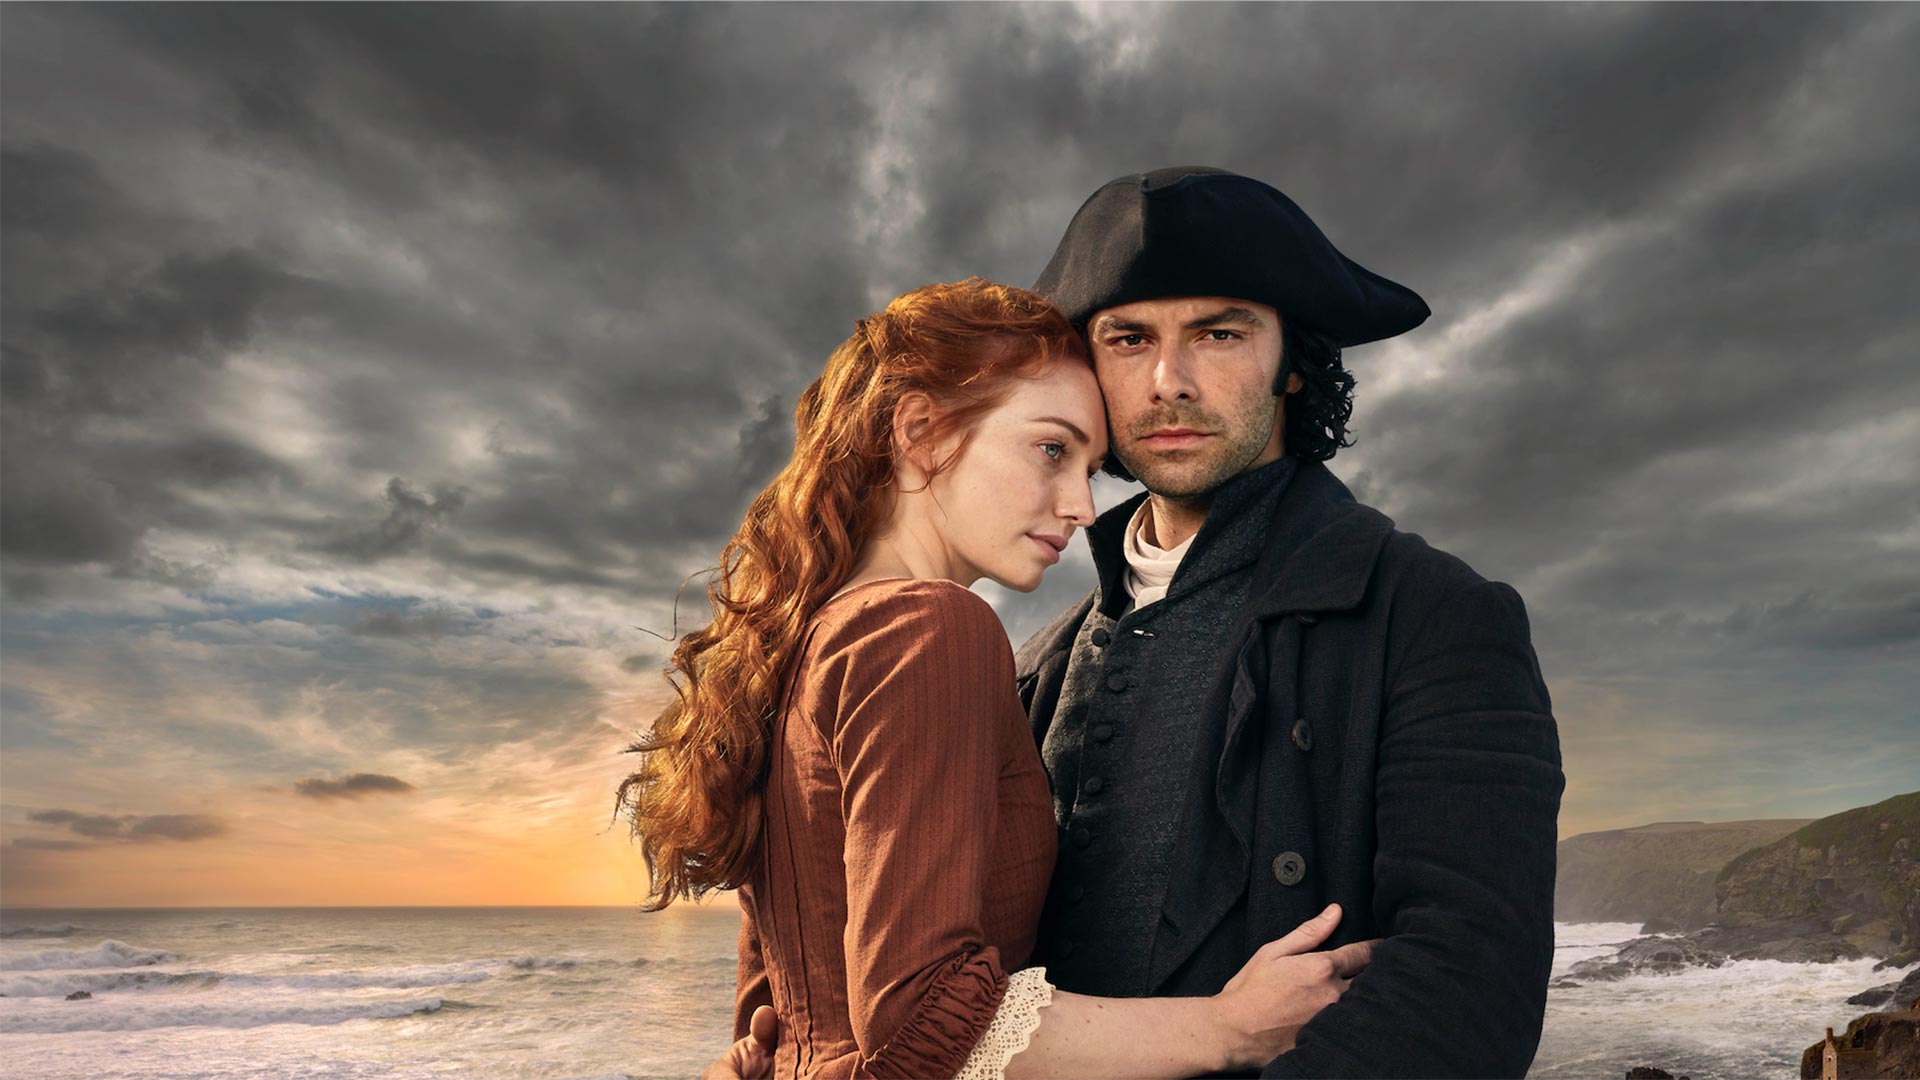 Shown from left to right: Eleanor Tomlinson as Demelza and Aidan Turner as Ross Poldark